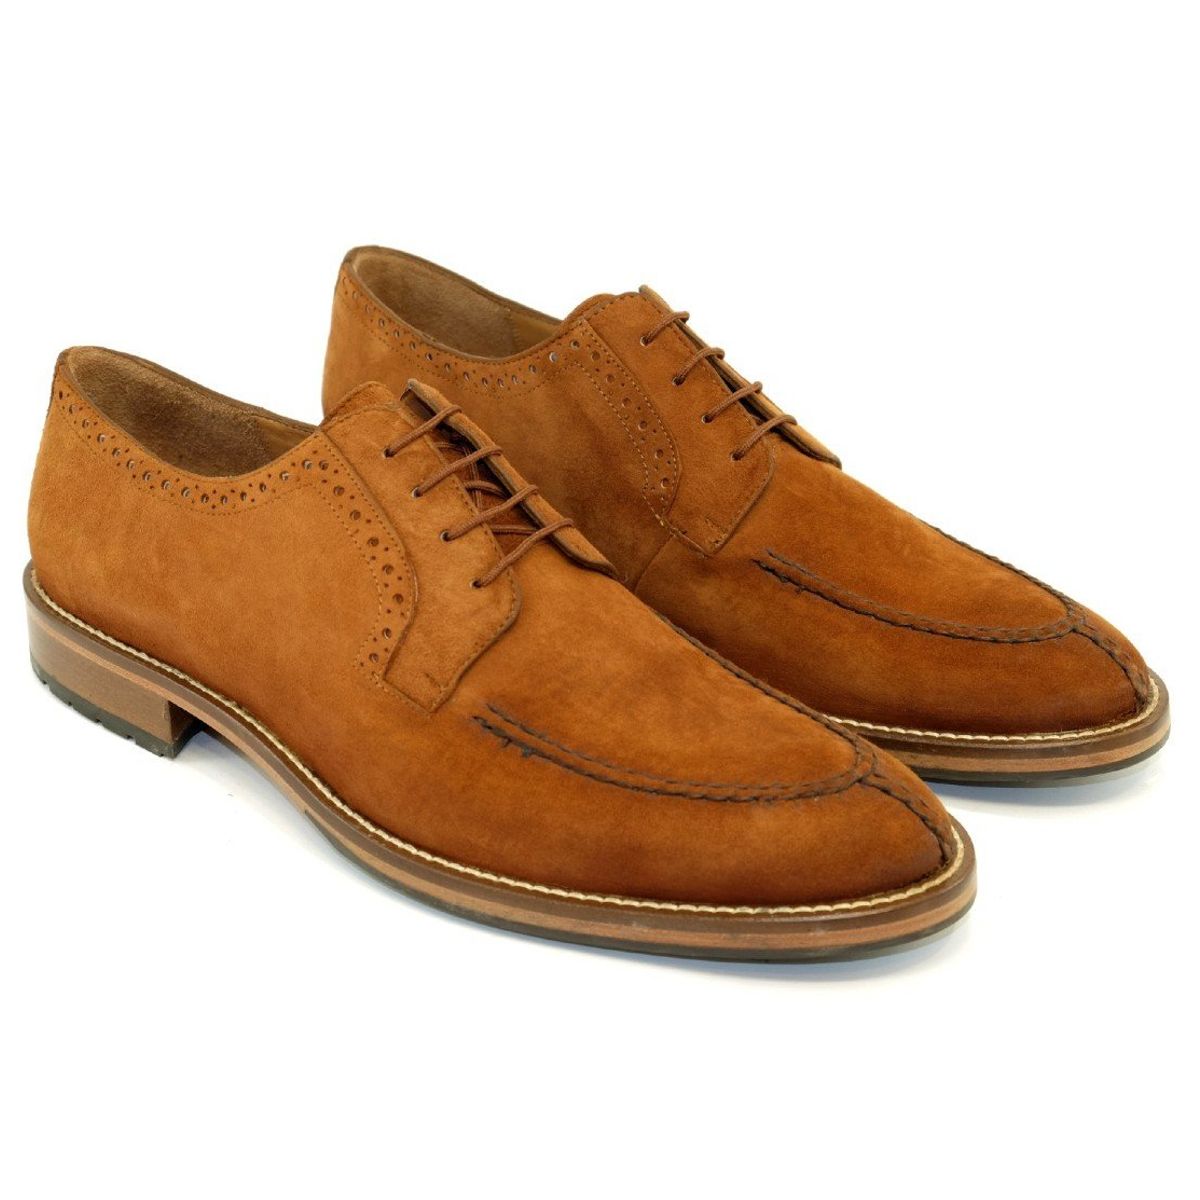 Wimbley Lace-Up Oxford in Honey Suede by Alan Payne Footwear